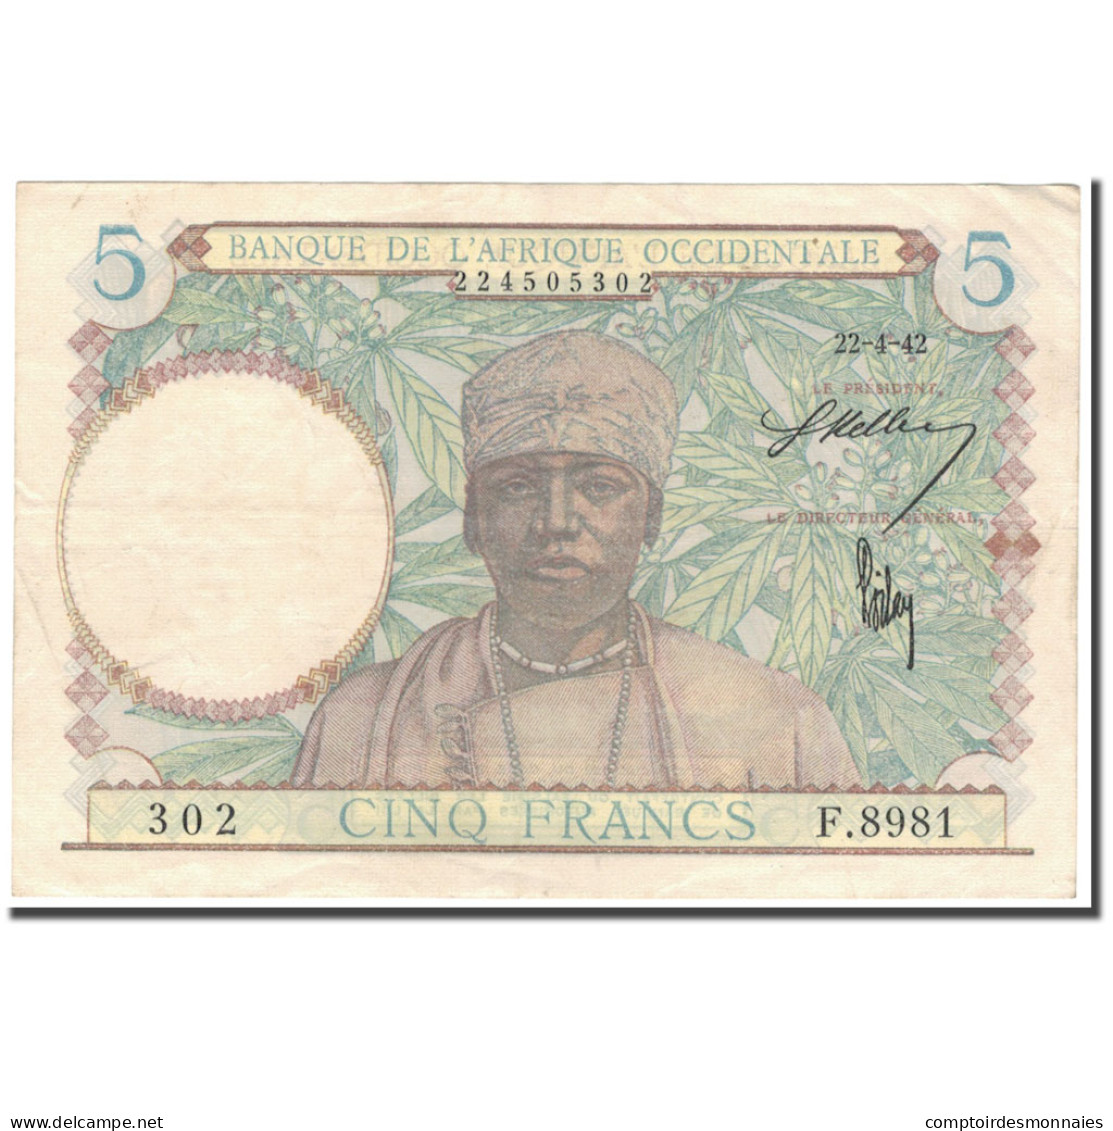 Billet, French West Africa, 5 Francs, 1942-04-22, KM:25, TTB+ - West African States